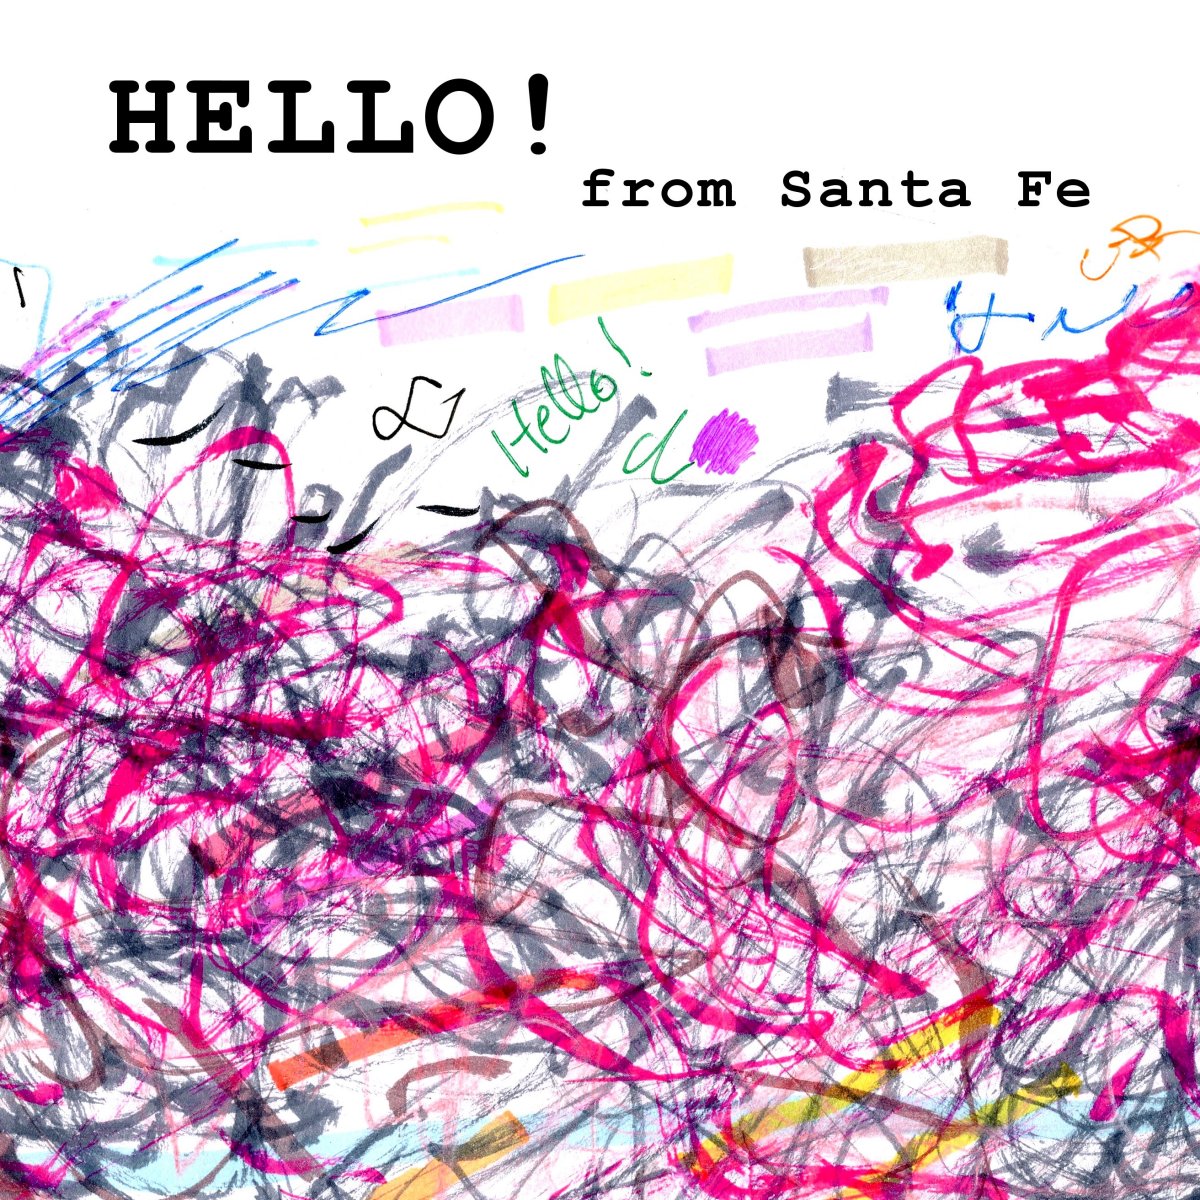 You are currently viewing Hello From Santa Fe Volume #2 from Fluxus Laboratories